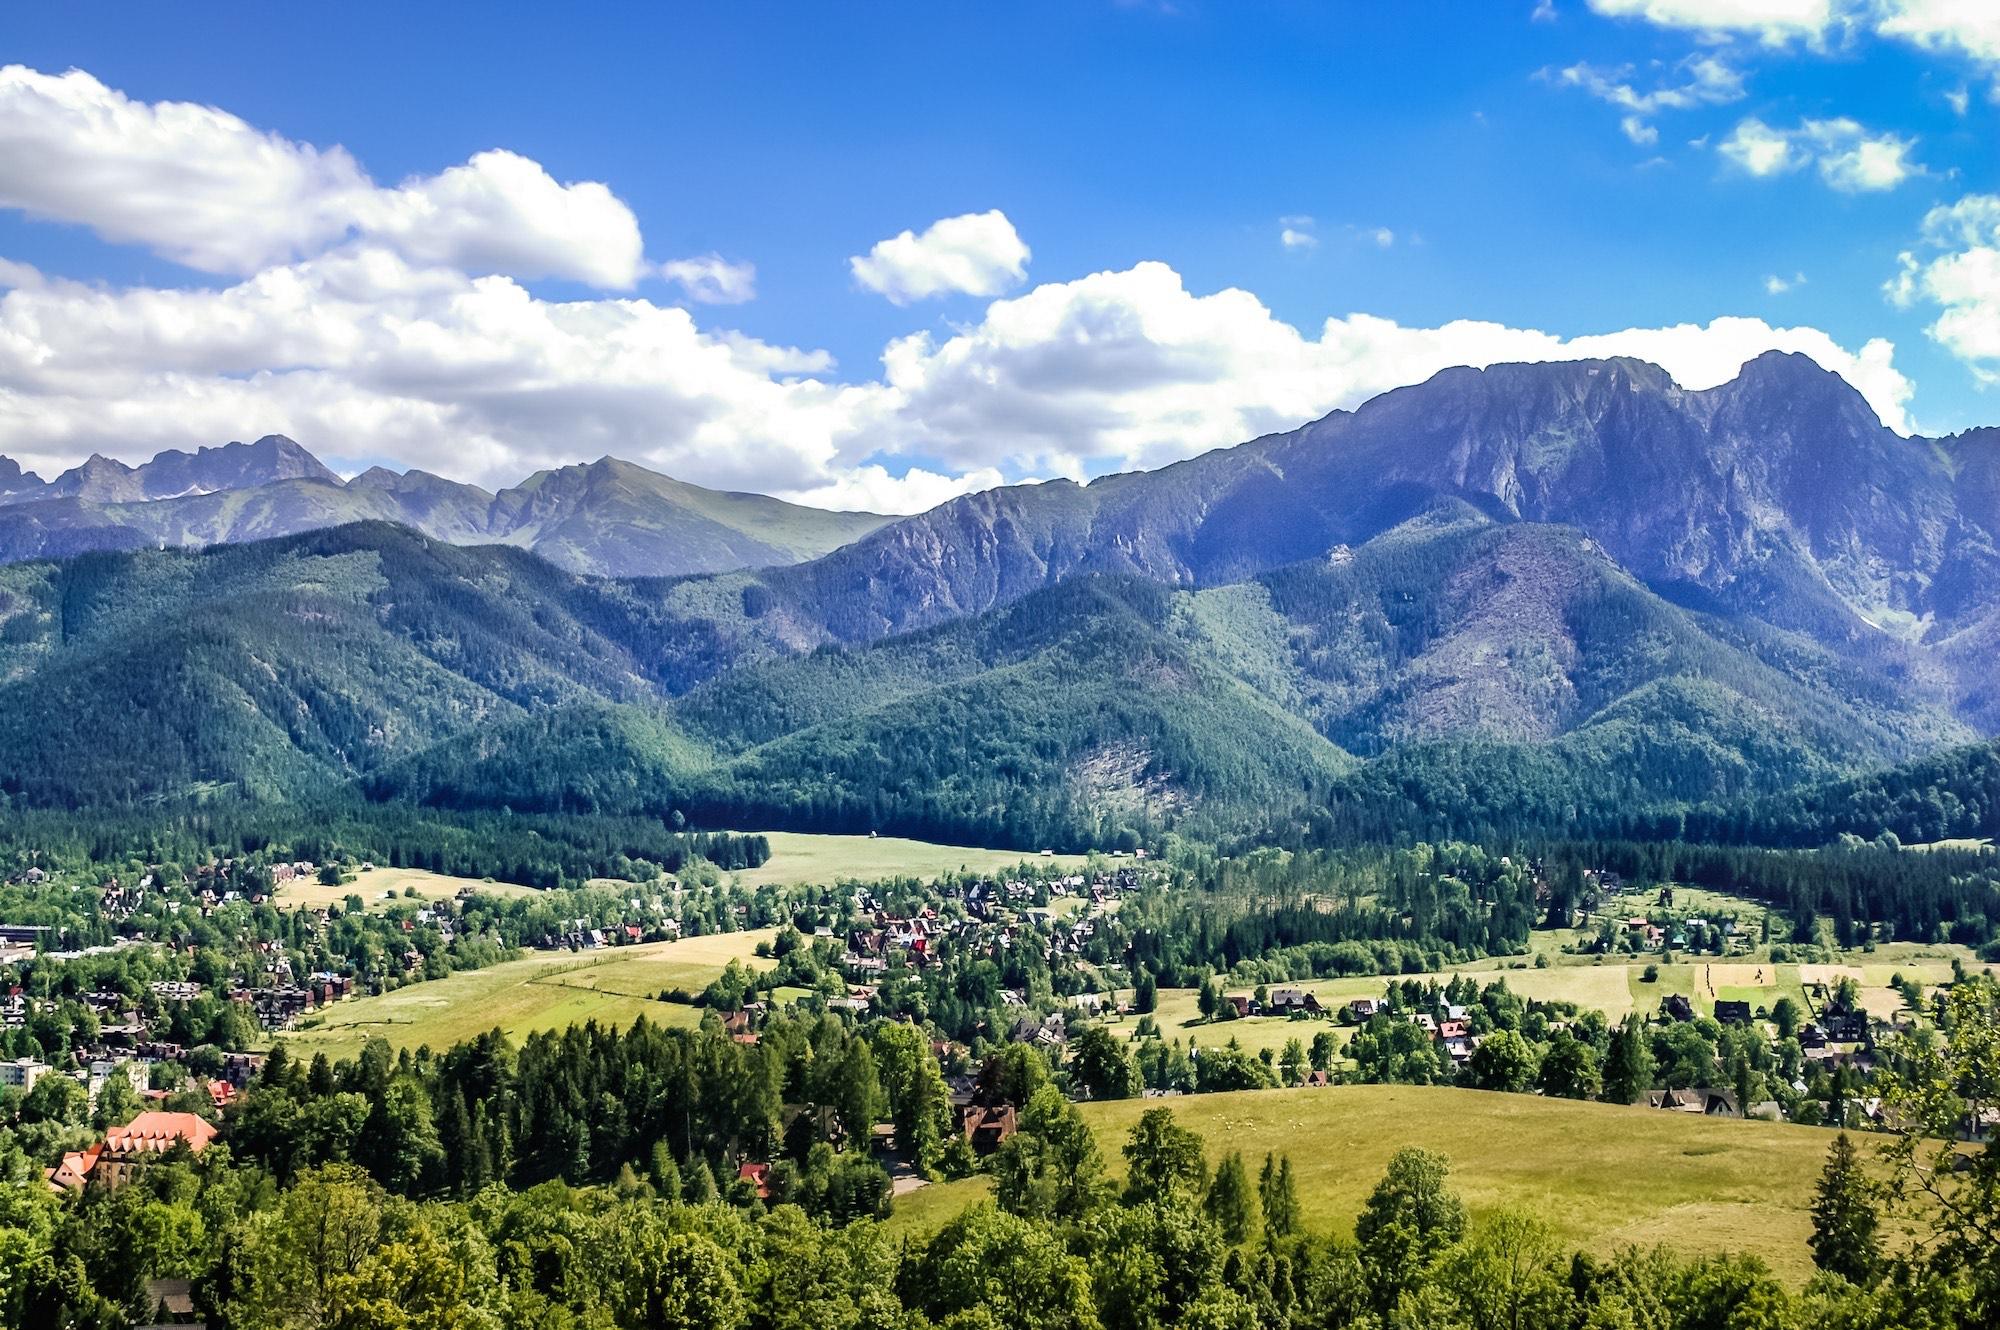 Panorama of the Western Tatra Mountains from Gubałówka with Mount Giewont in the foreground. When visiting Gubałówka, it is worth walking along the road towards Butorowy Wierch, where you'll pass souvenir stalls, highlander inns and enjoy active attractions including climbing walls, rope parks, and horse or quad riding. – © Alicja Neumiller